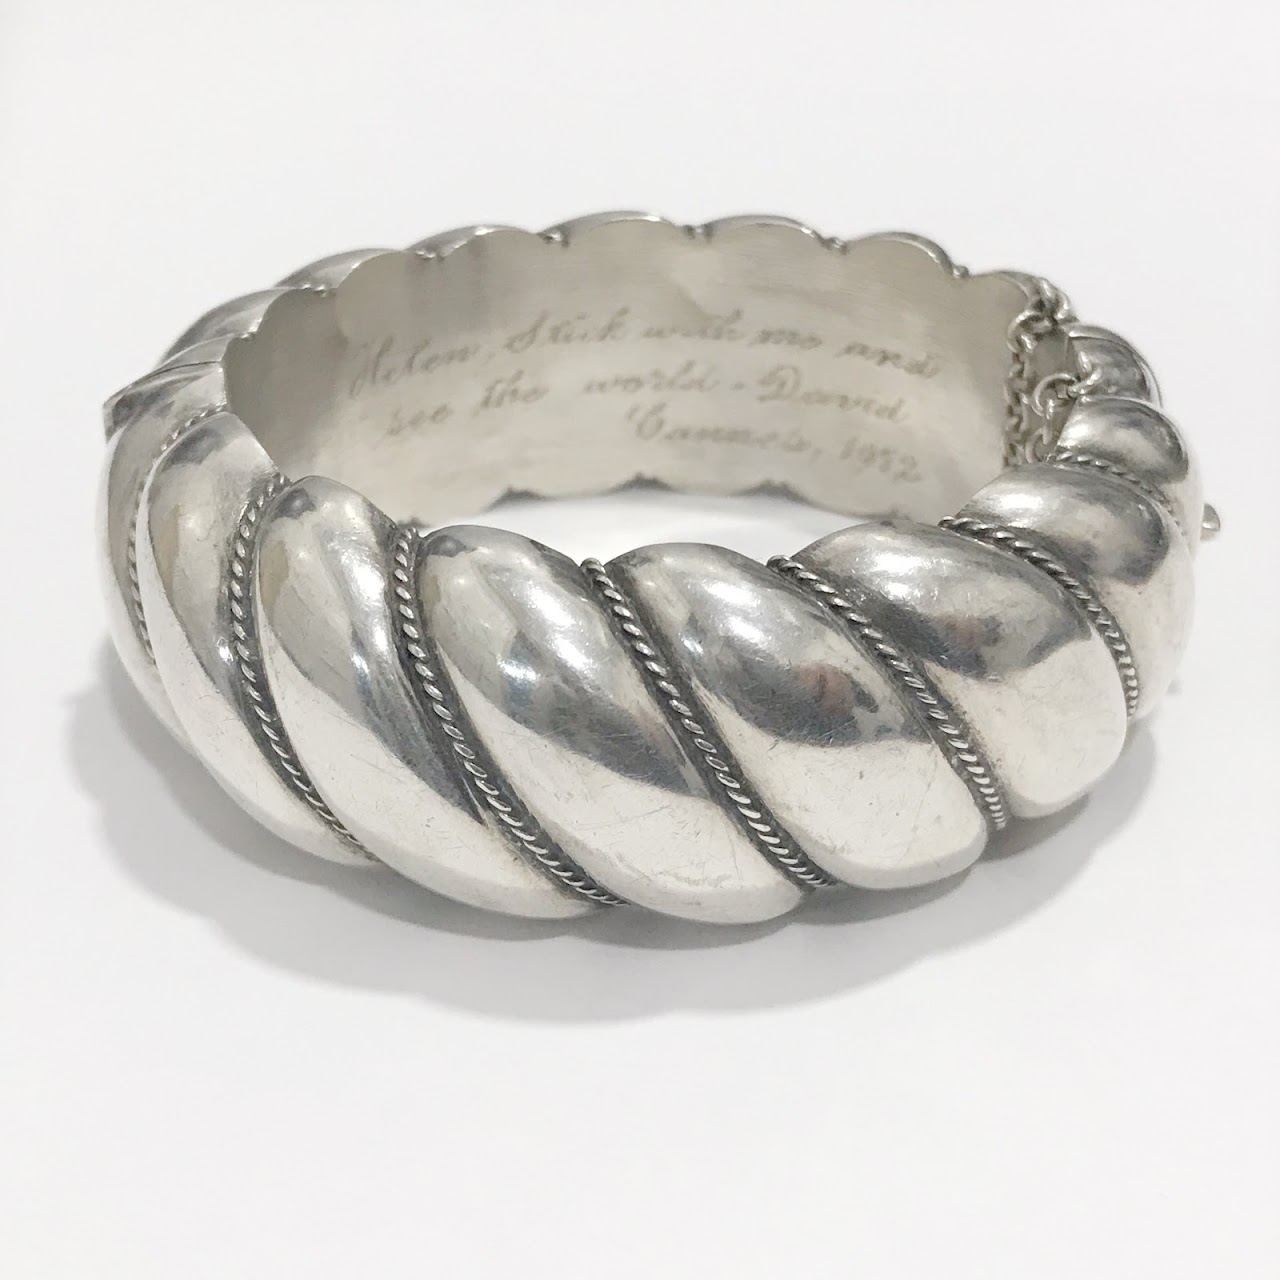 Rene Sitoleux Engraved Silver Bangle